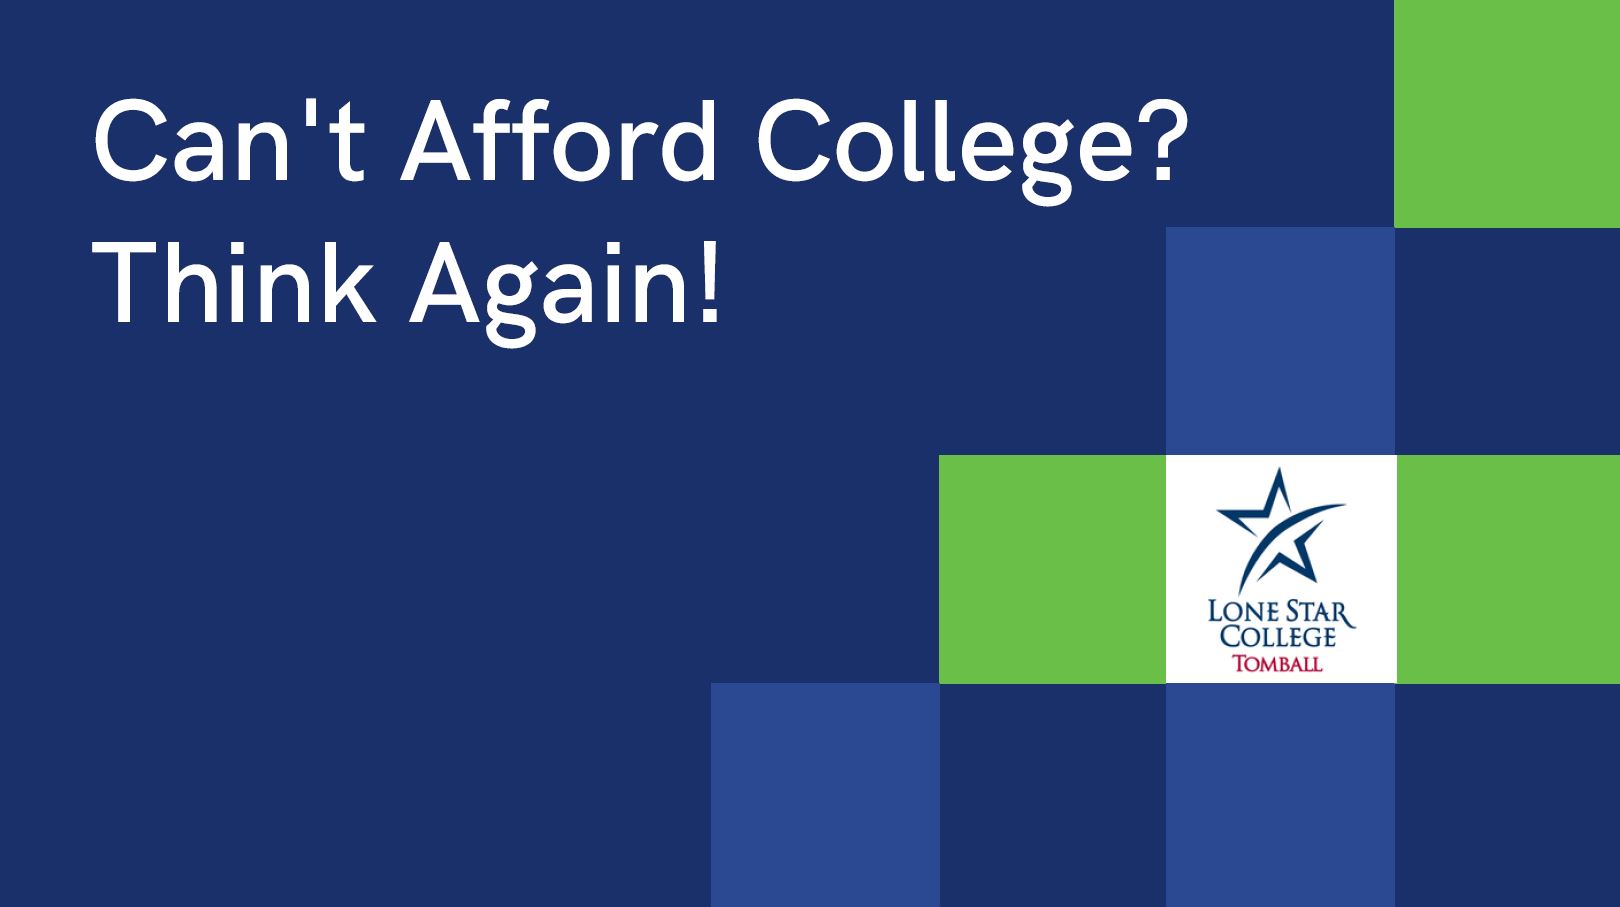 Can't Afford College? Think Again!